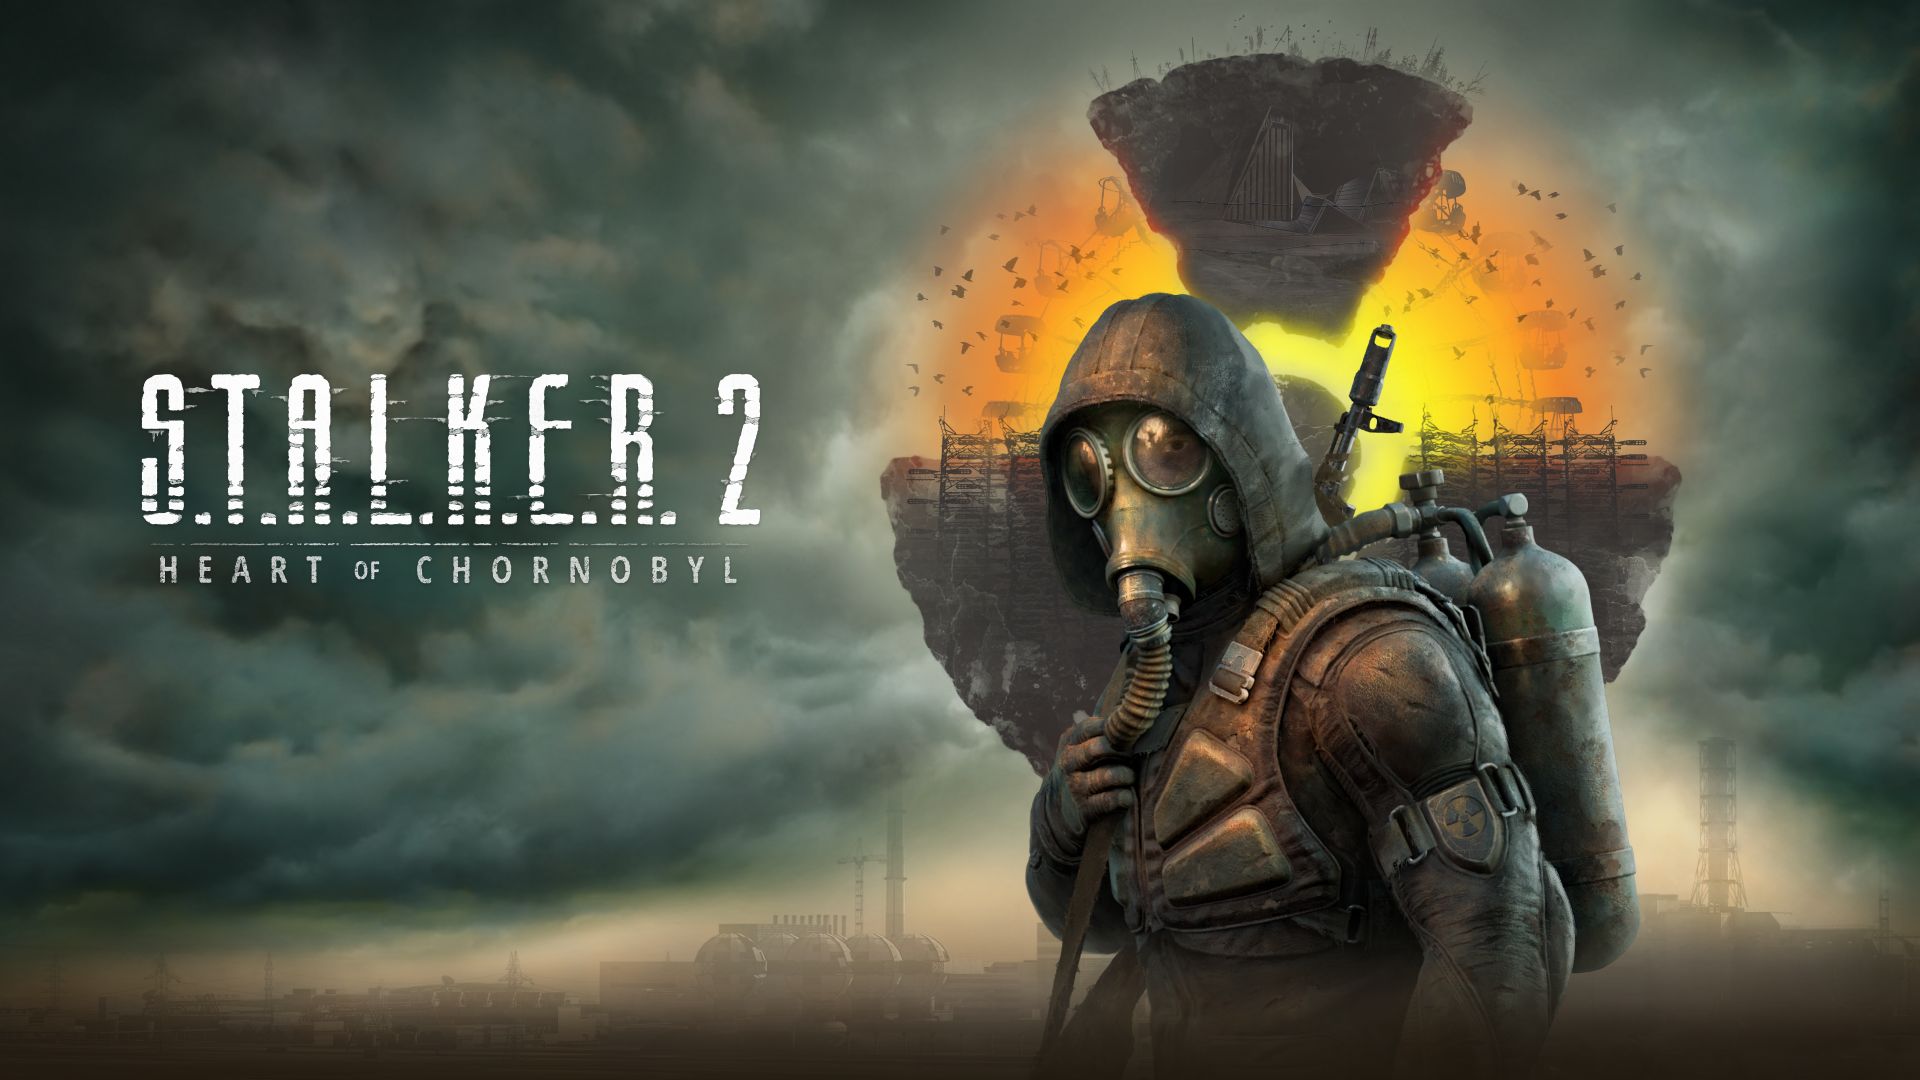 Stalker 2: Heart of Chornobyl gets a playable demo at Gamescom